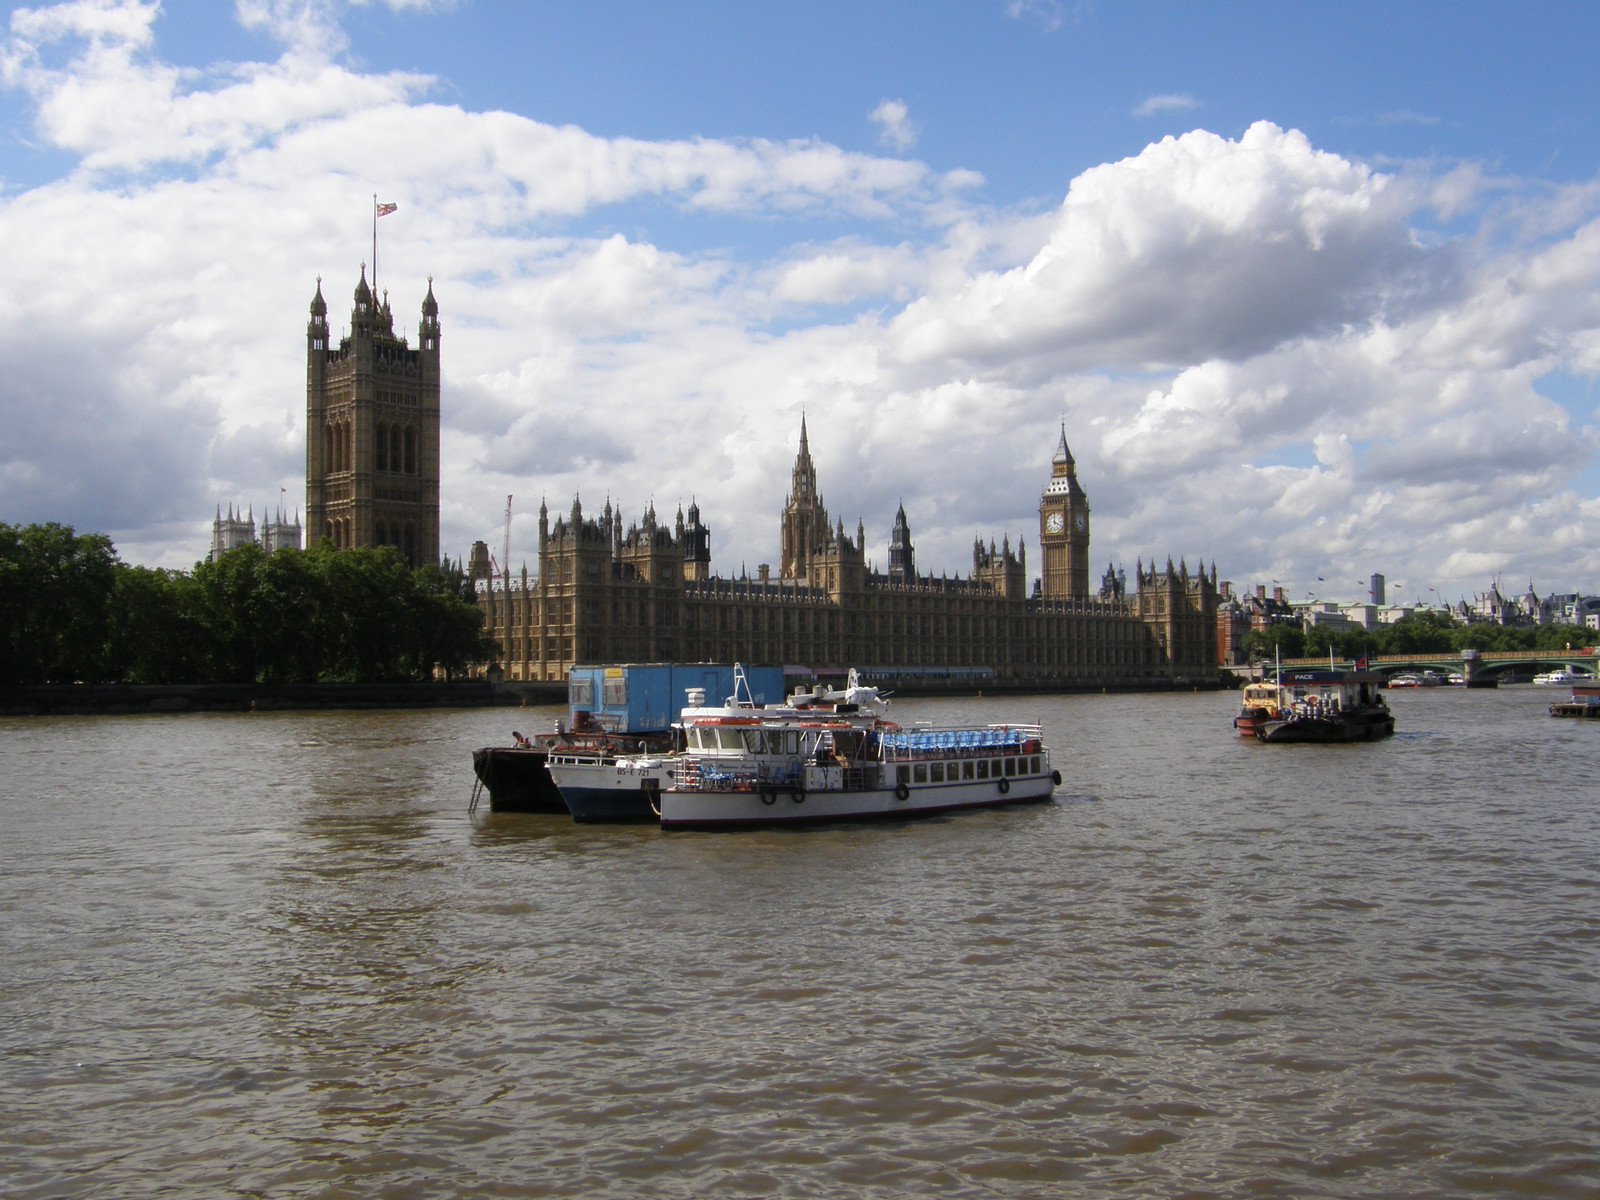 The Houses of Parliament from Lambeth Palace Road